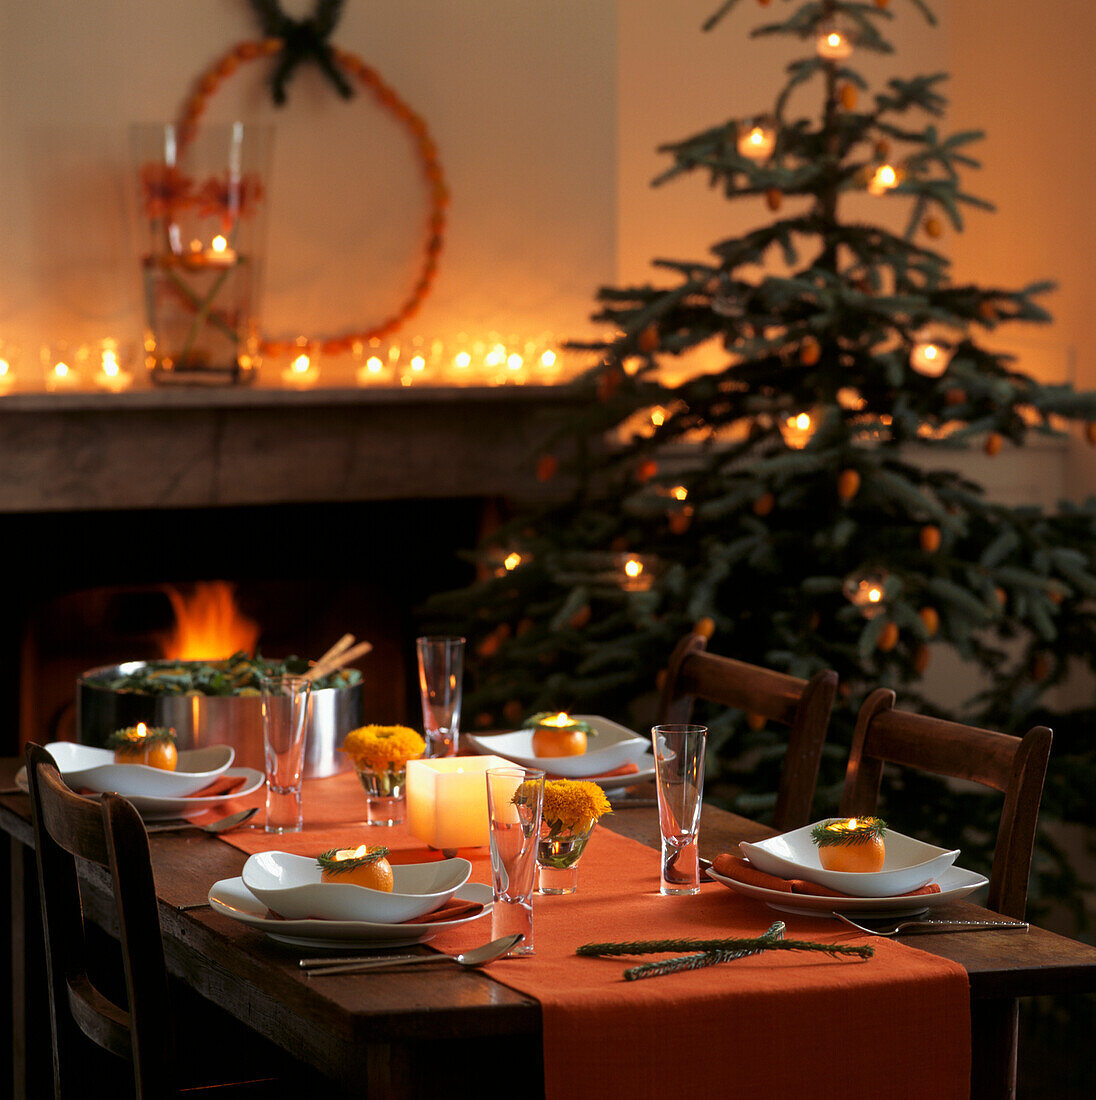 Christmas table setting in orange colours with open fire and twinkling candles